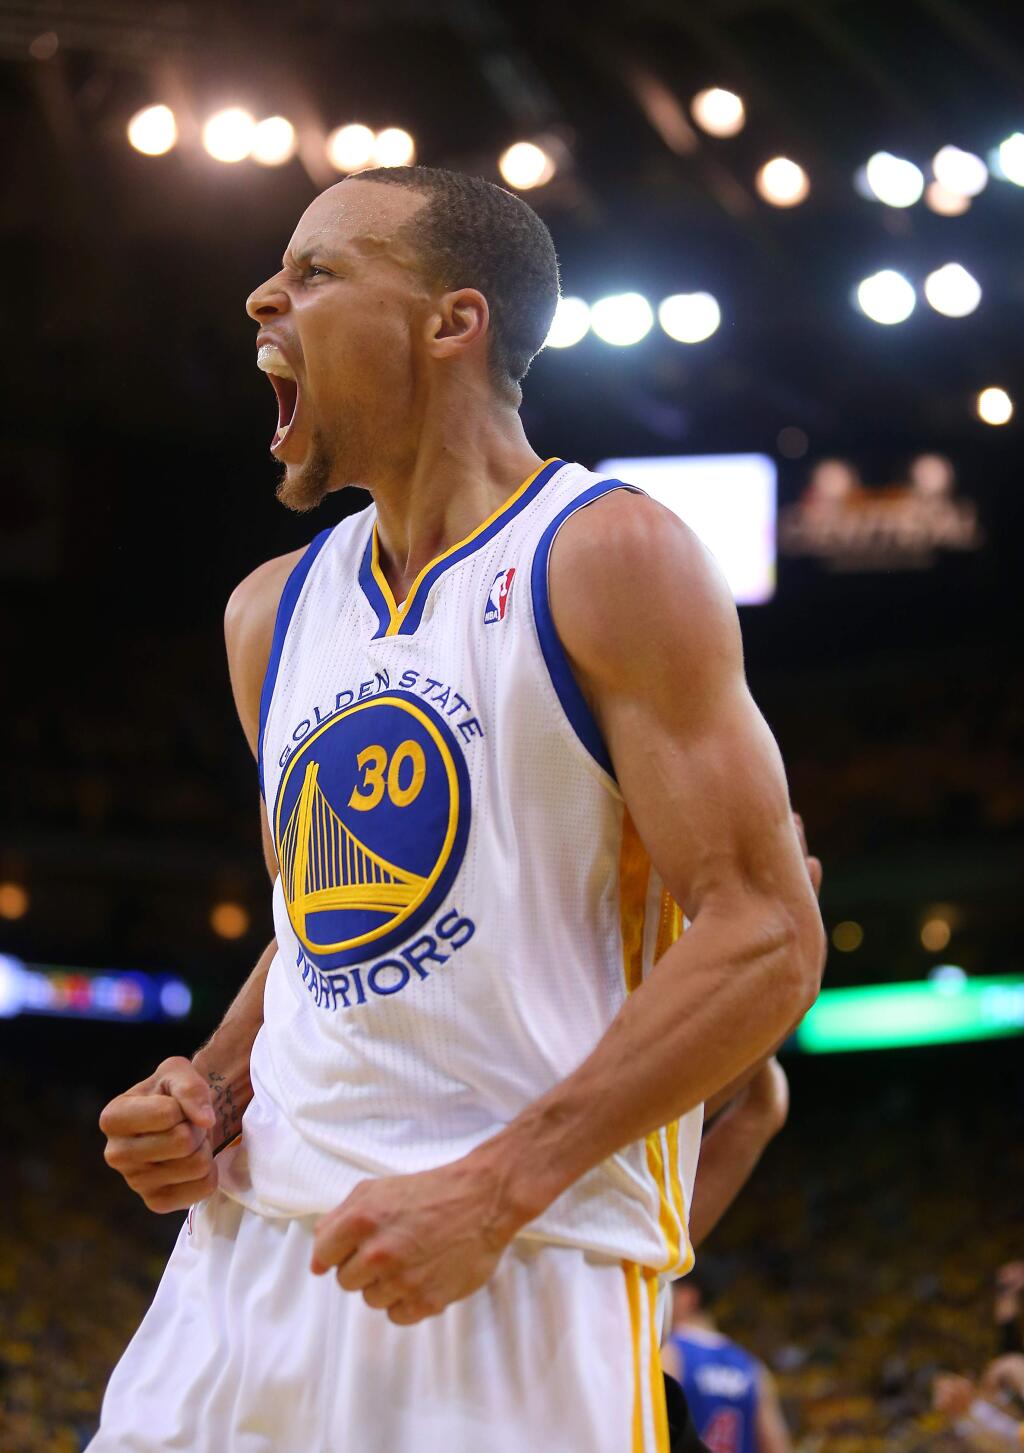 Golden State Warriors guard Stephen Curry lets out a yell after blocking a shot attempt by Los Angeles Clippers guard J.J. Redick during Game 4 in Oakland on Sunday, April 27, 2014. The Warriors defeated the Clippers 118-97(Christopher Chung/ The Press Democrat)